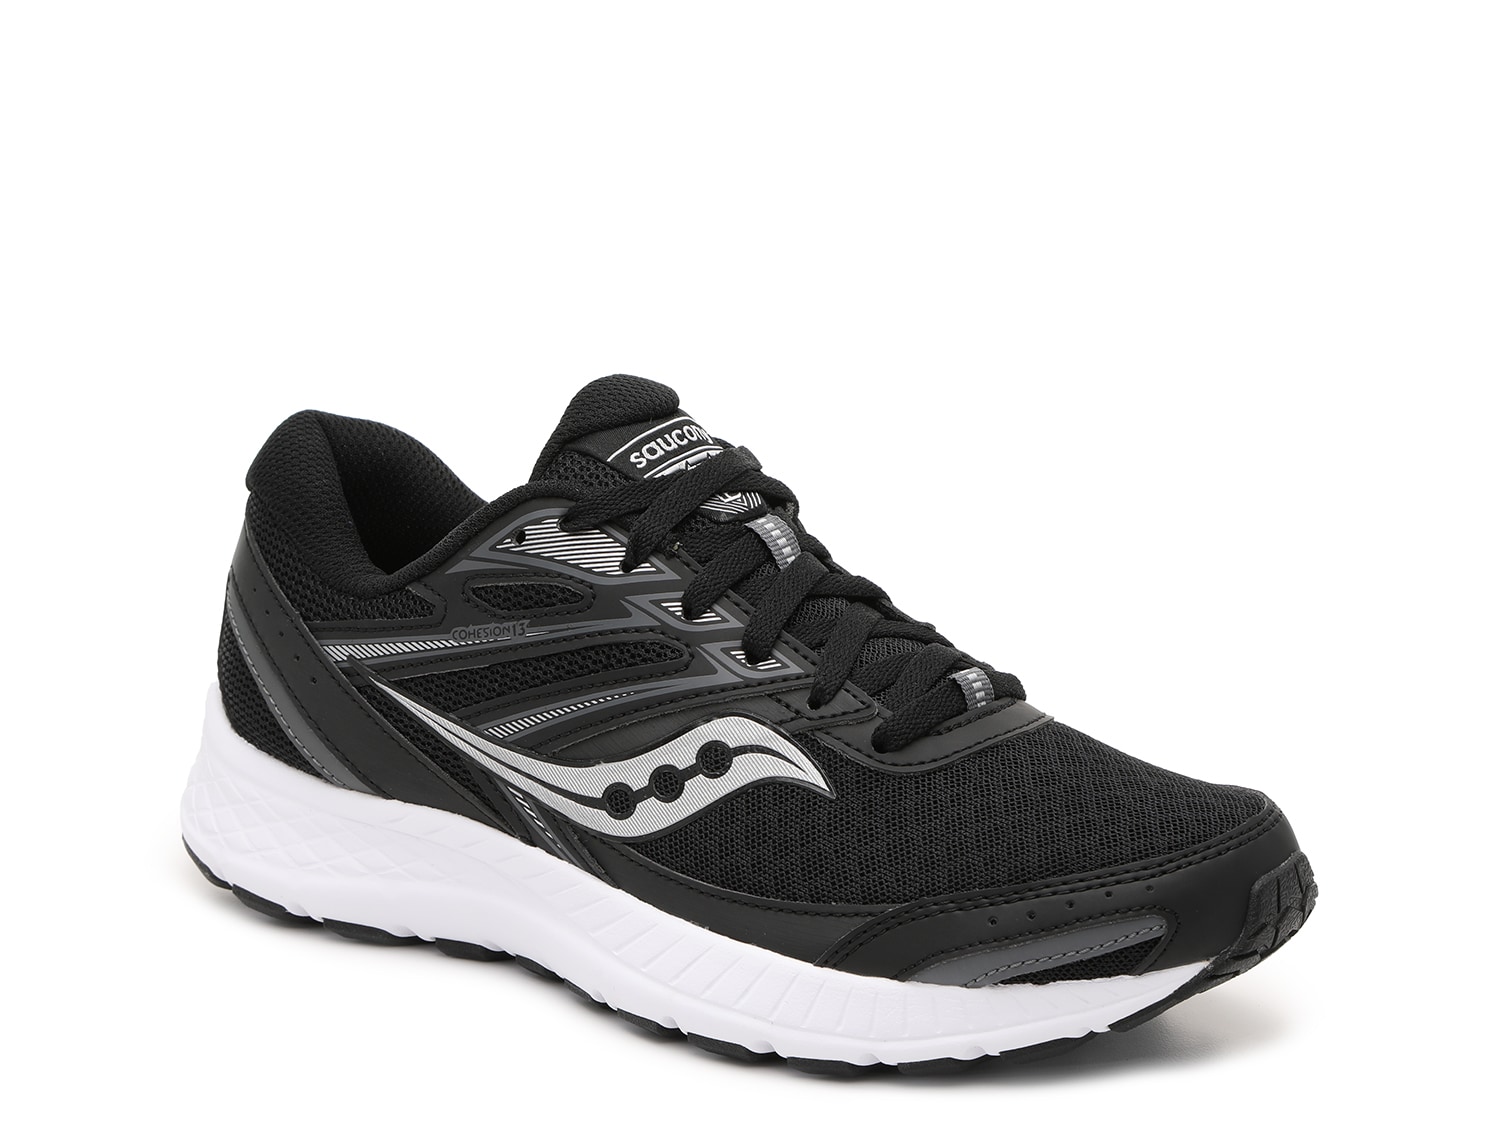 saucony grid cohesion 10 women's running shoes